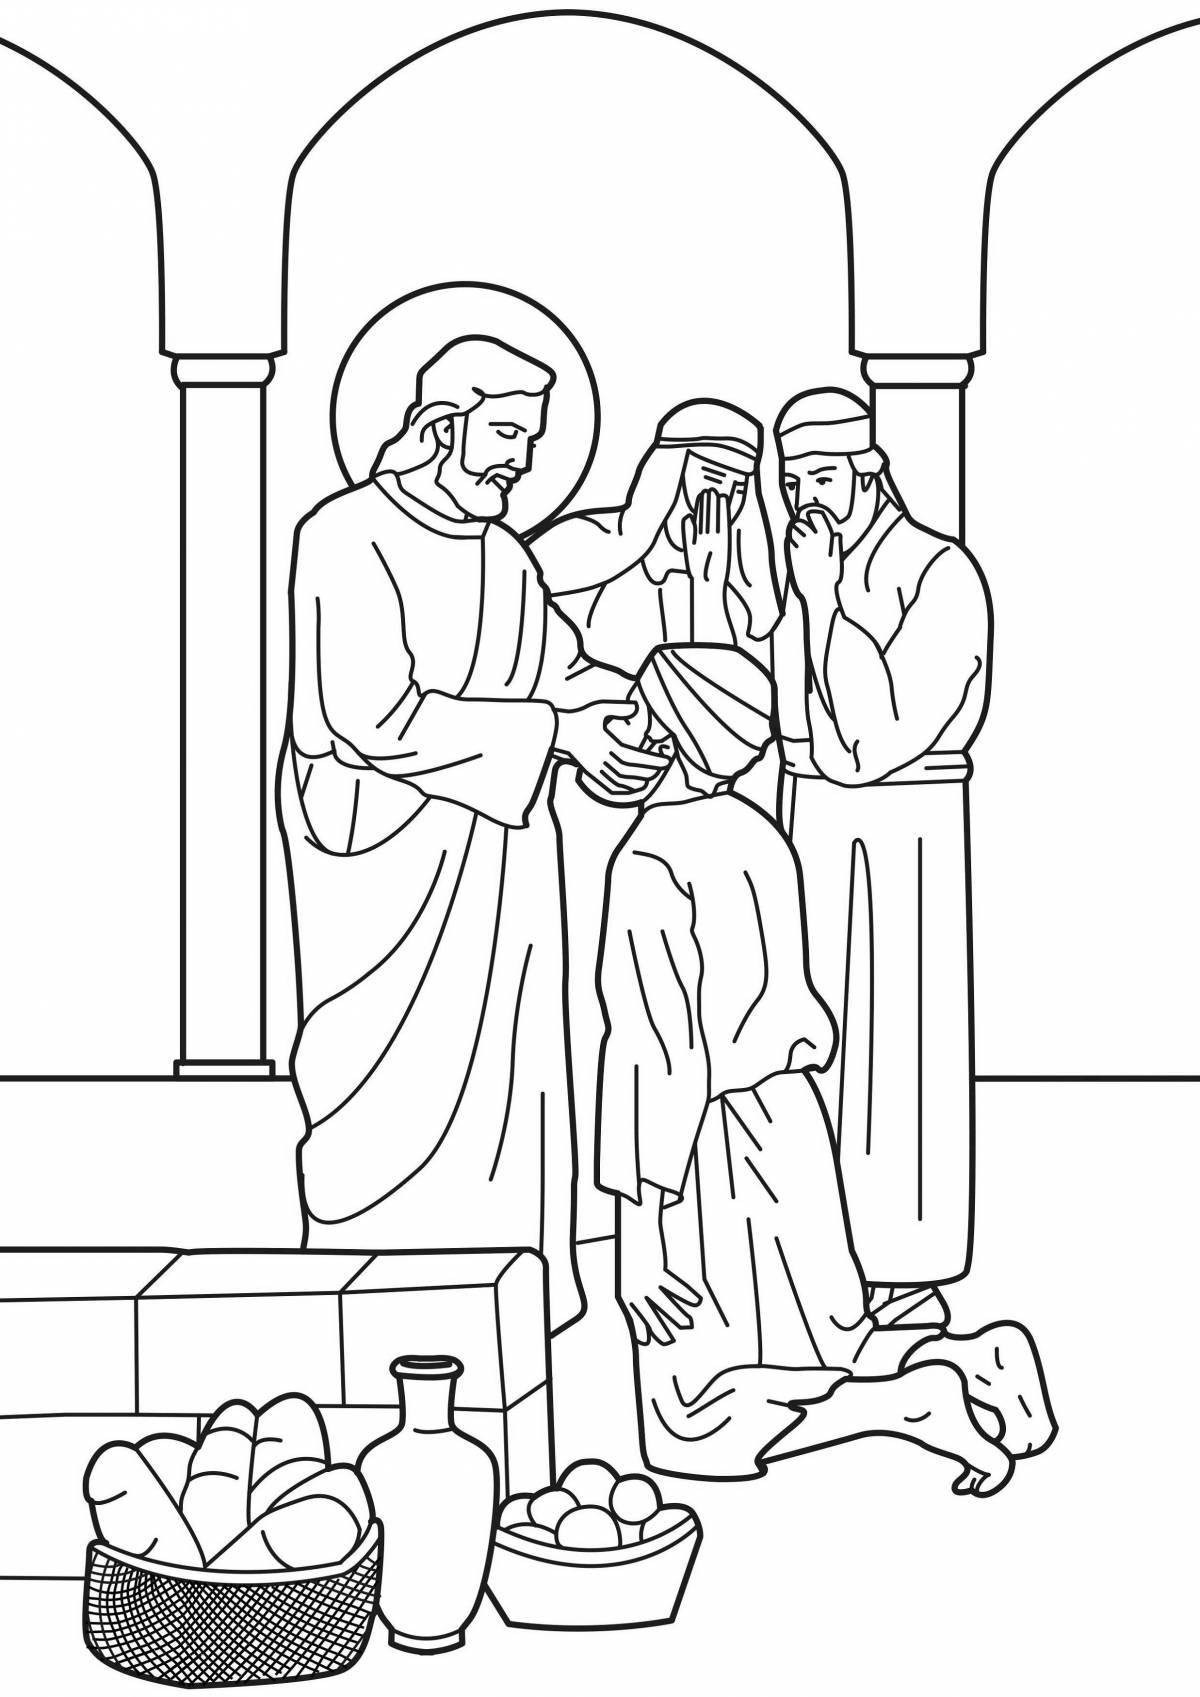 Coloring book playful publican and Pharisee